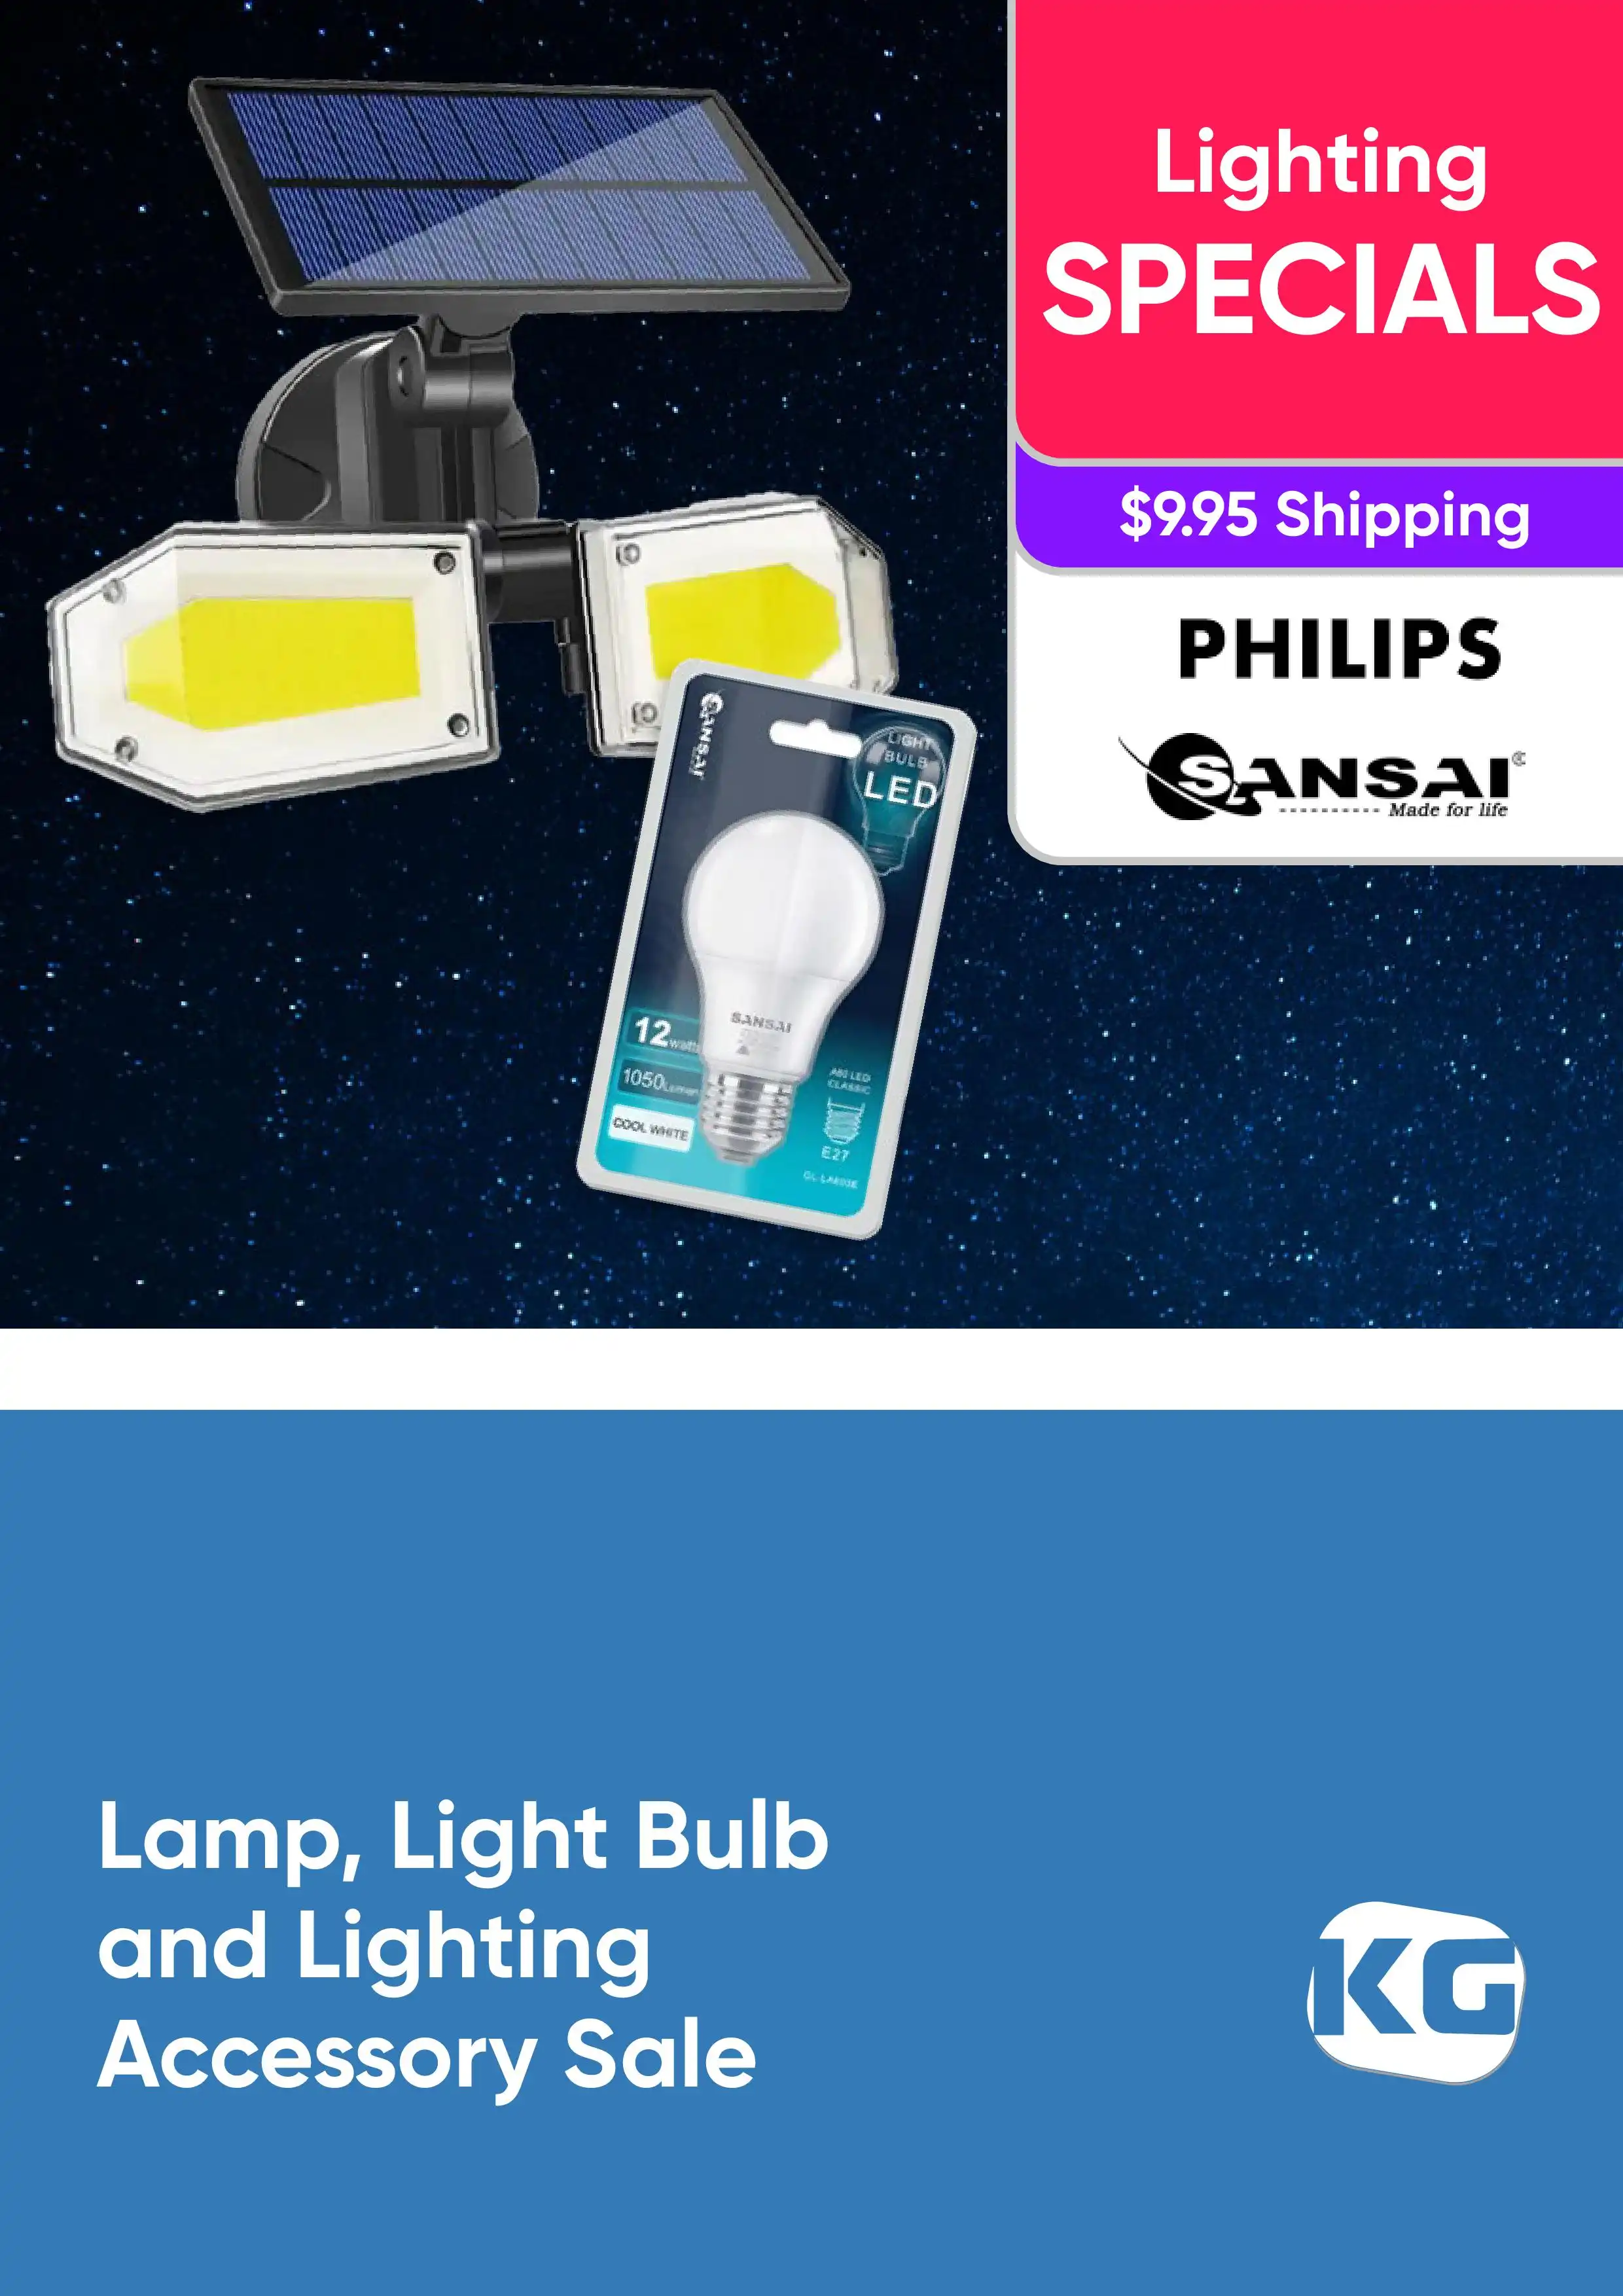 Lamp, Light Bulb and Lighting Accessory Sale